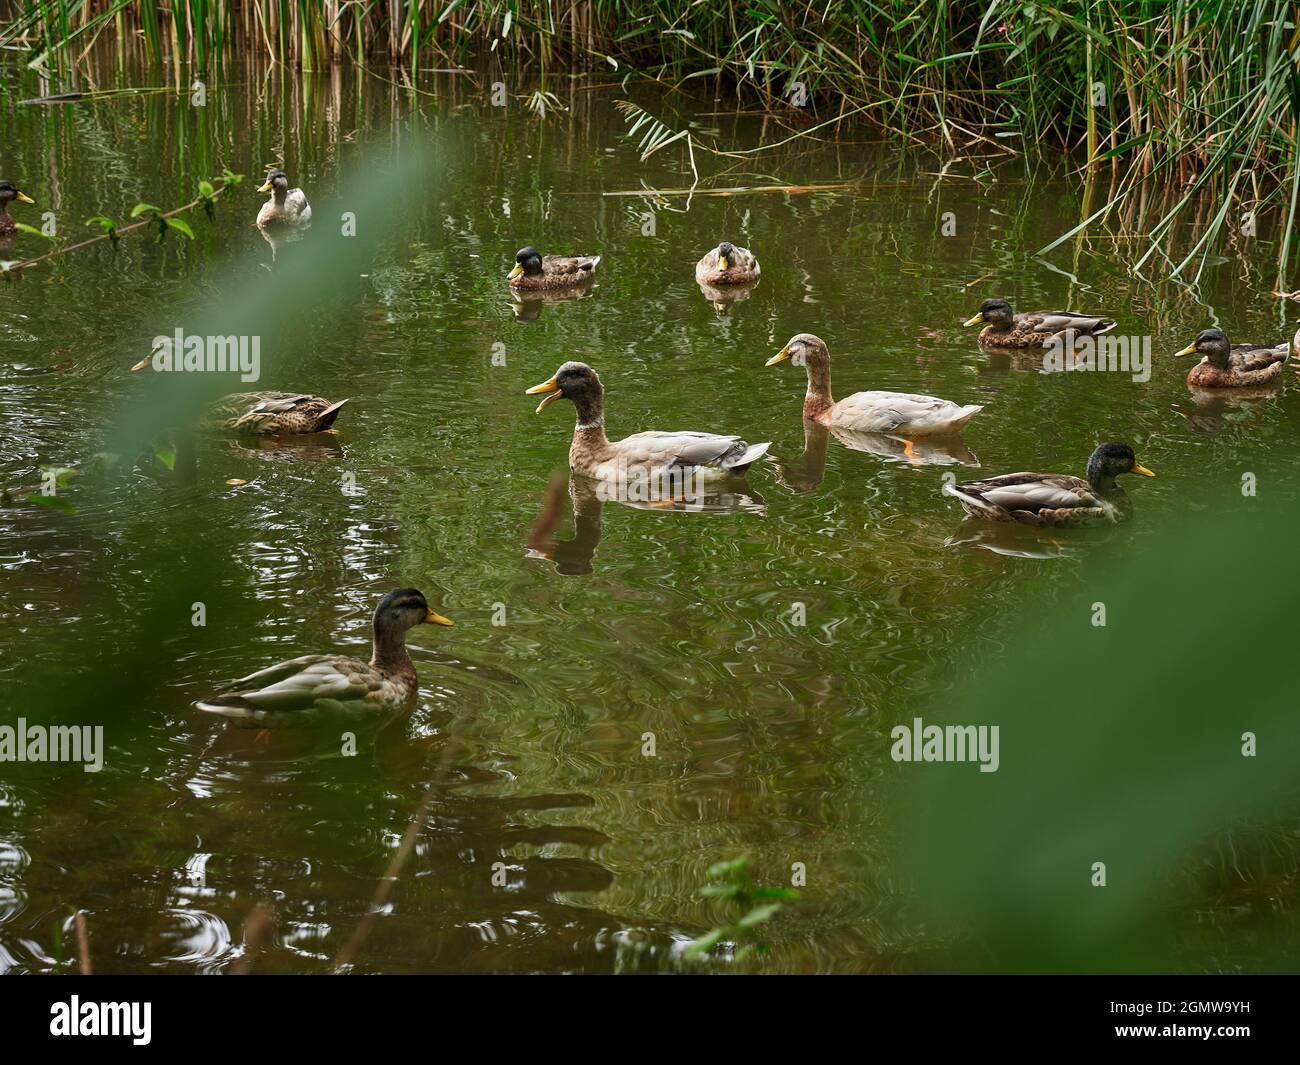 Ducks in the pond with blurred leaves in the foreground and a loud duck in the middle Stock Photo